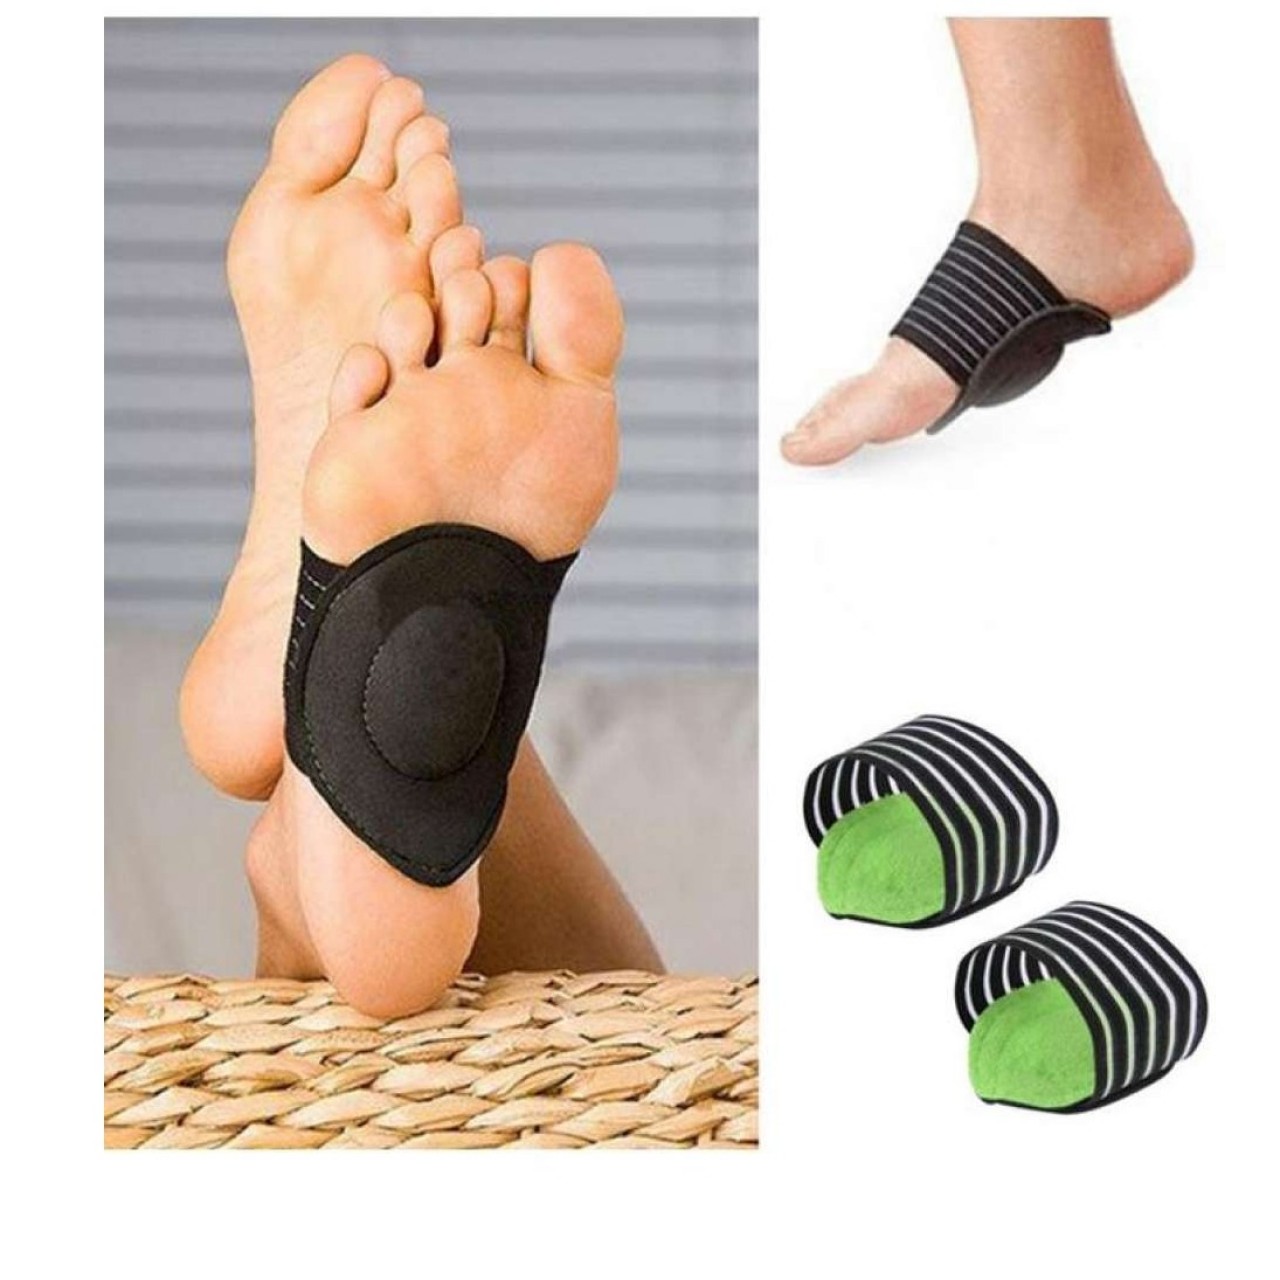 Strutz Arch Support - Relief Achy Tired Pain